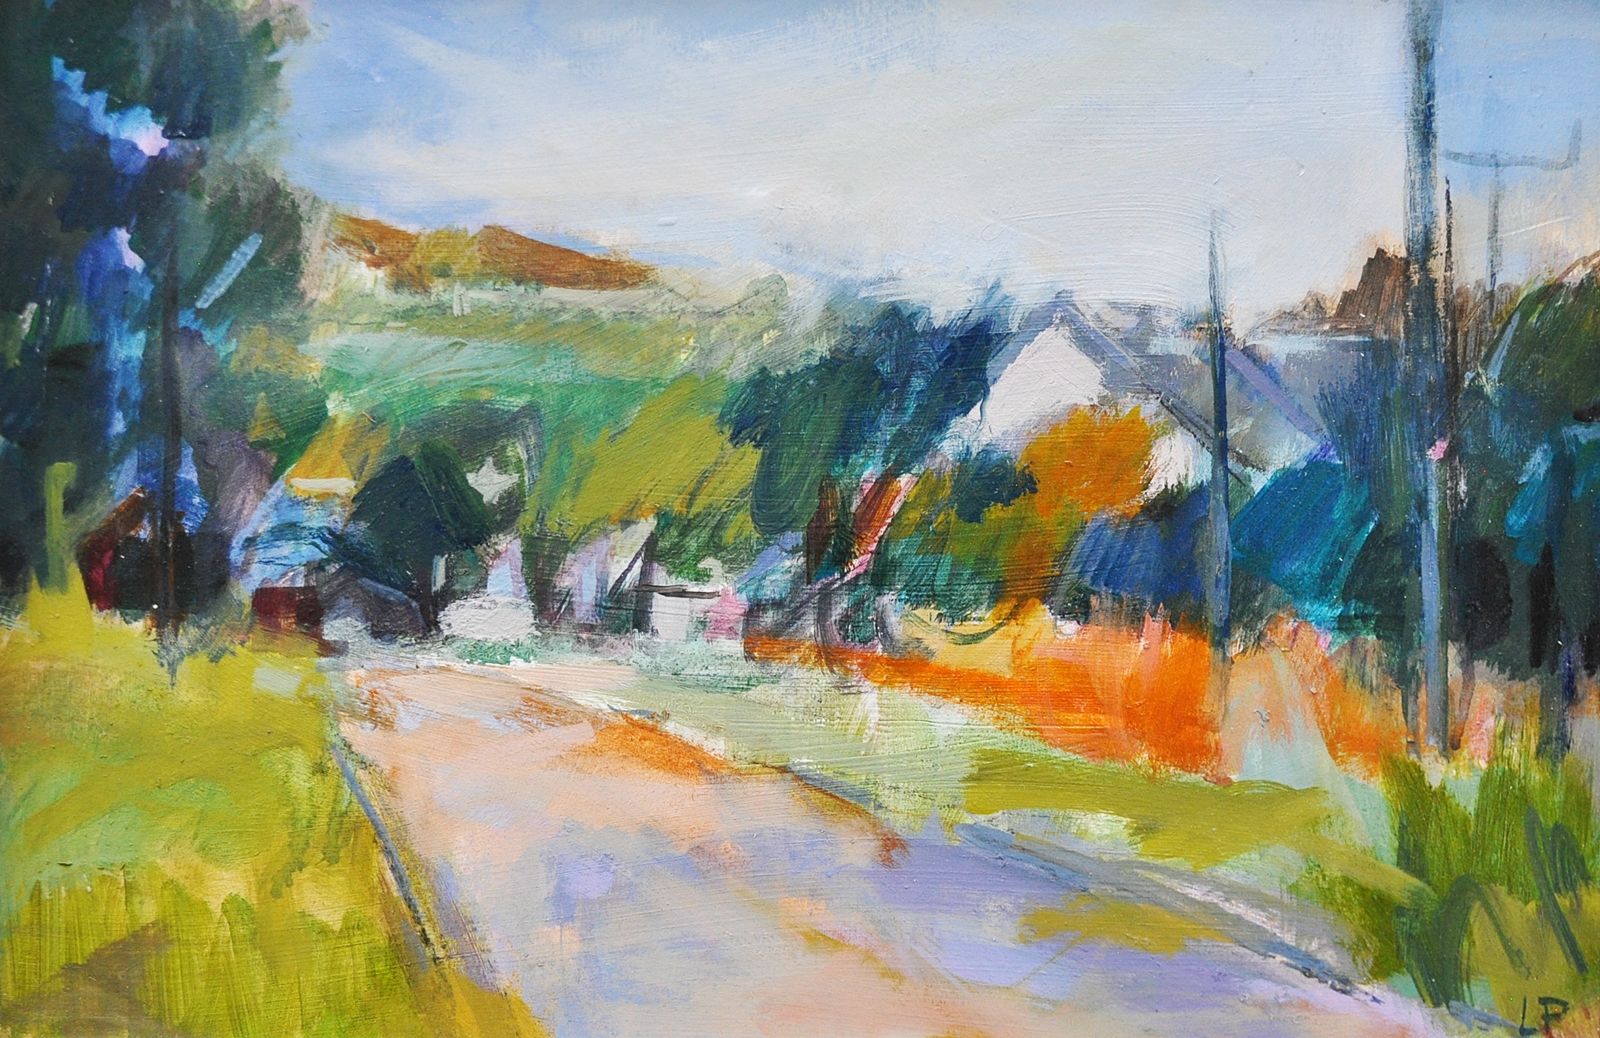 The Road to the Studio by Lucy Powell